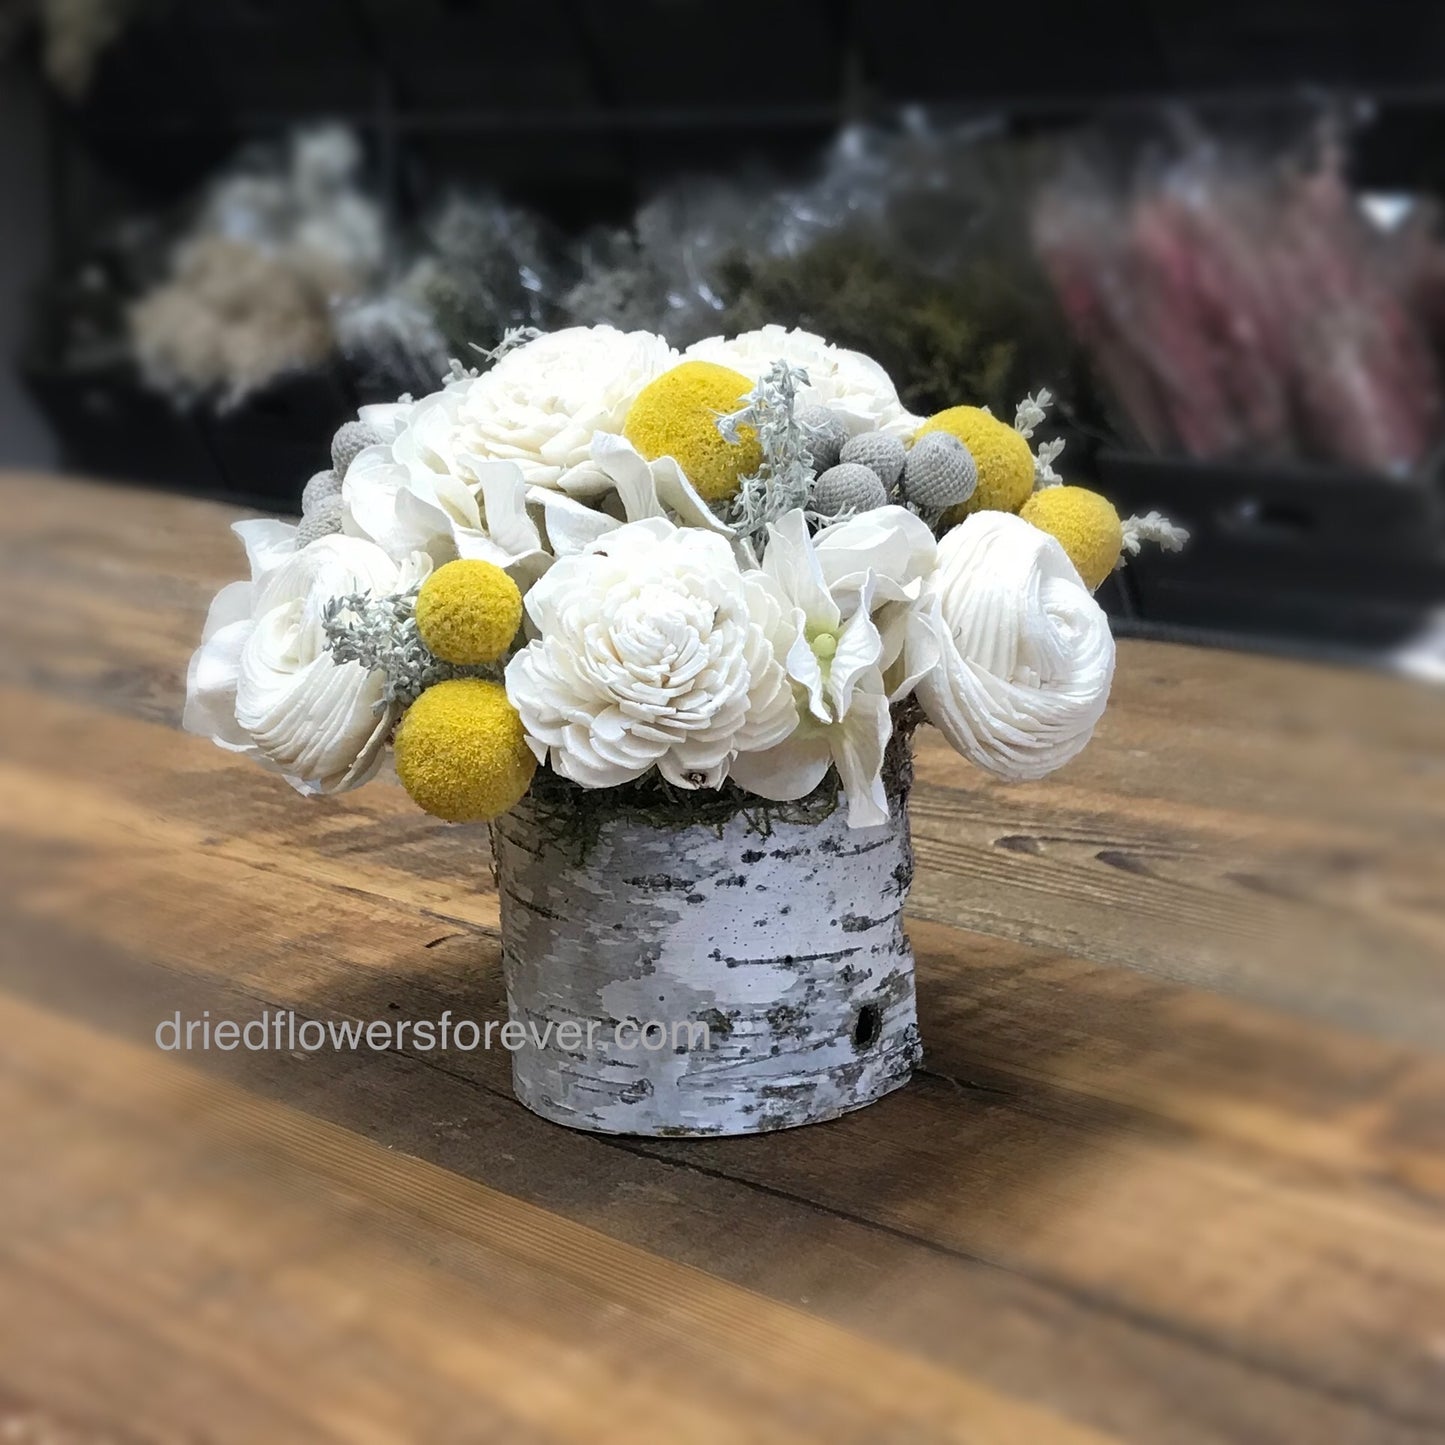 Yellow & Soft Gray Dried Floral Arrangement